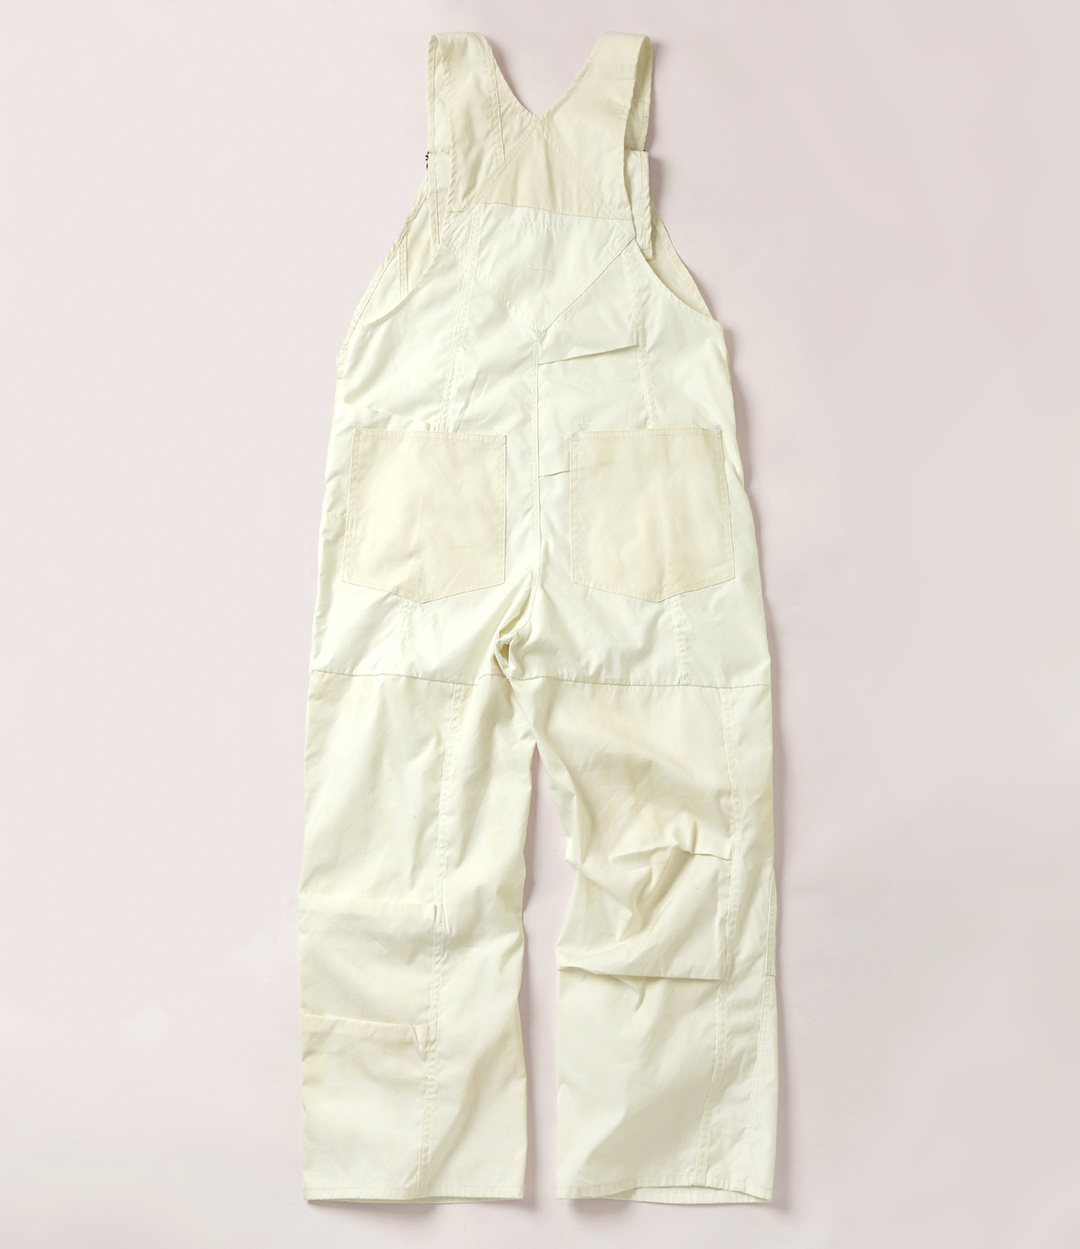 M-51 Over Pant -> Overall ¥52,800